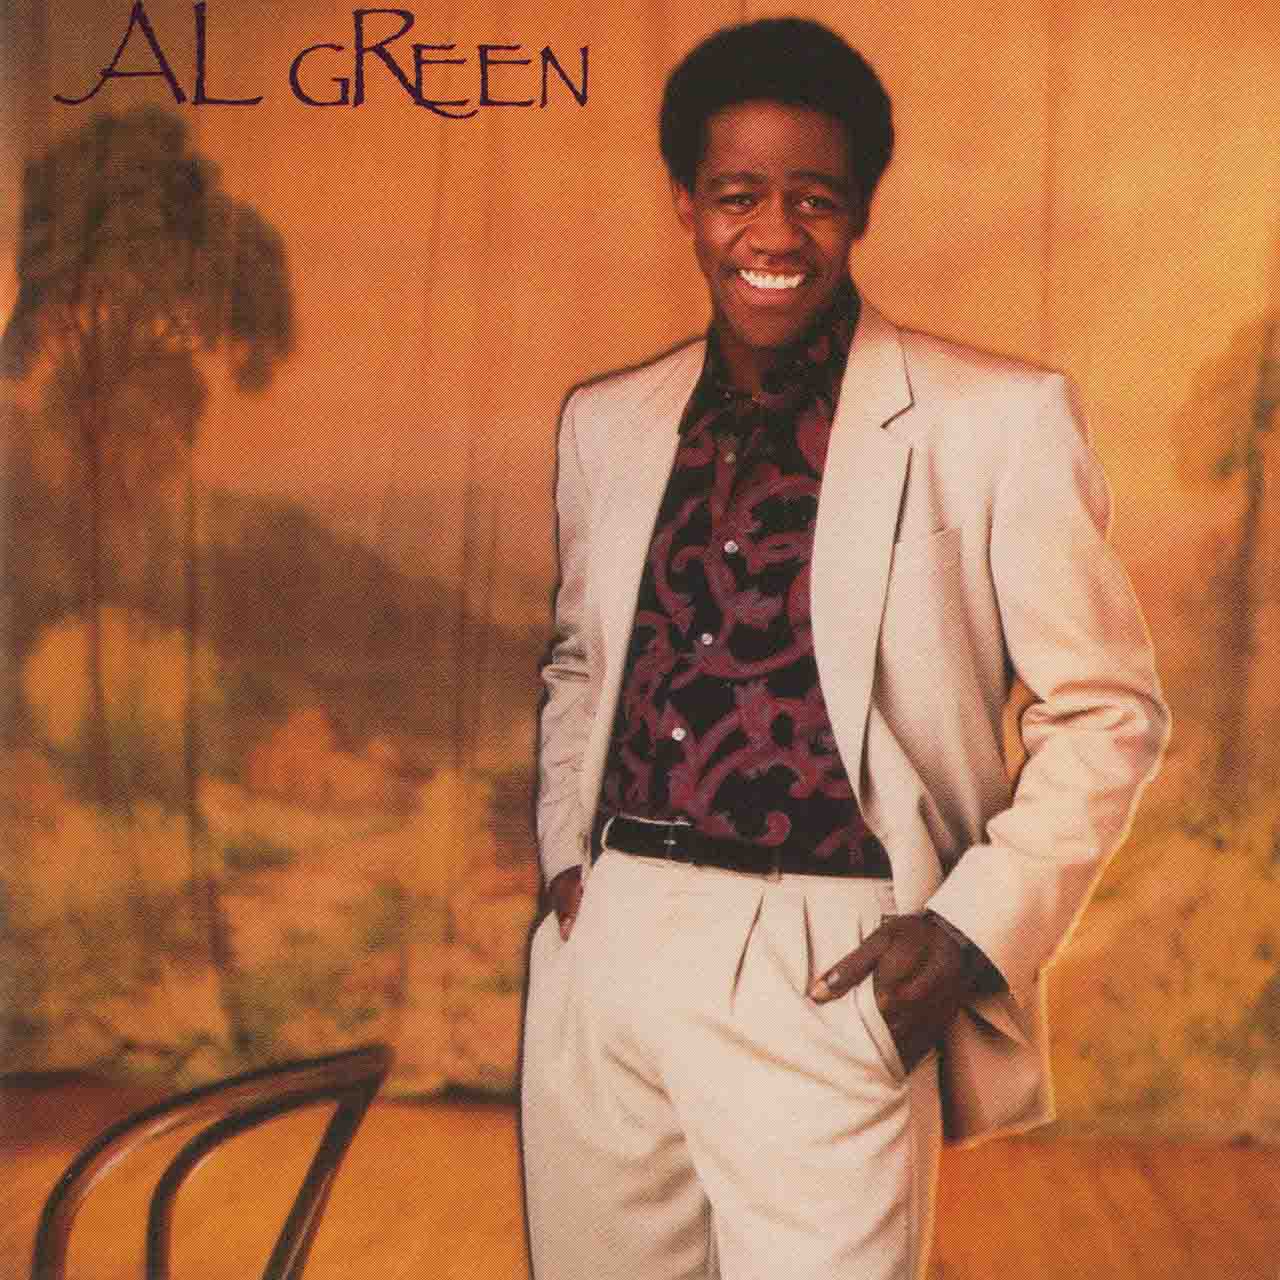 Al Green’s A&M Years: Balancing The Sacred And Secular